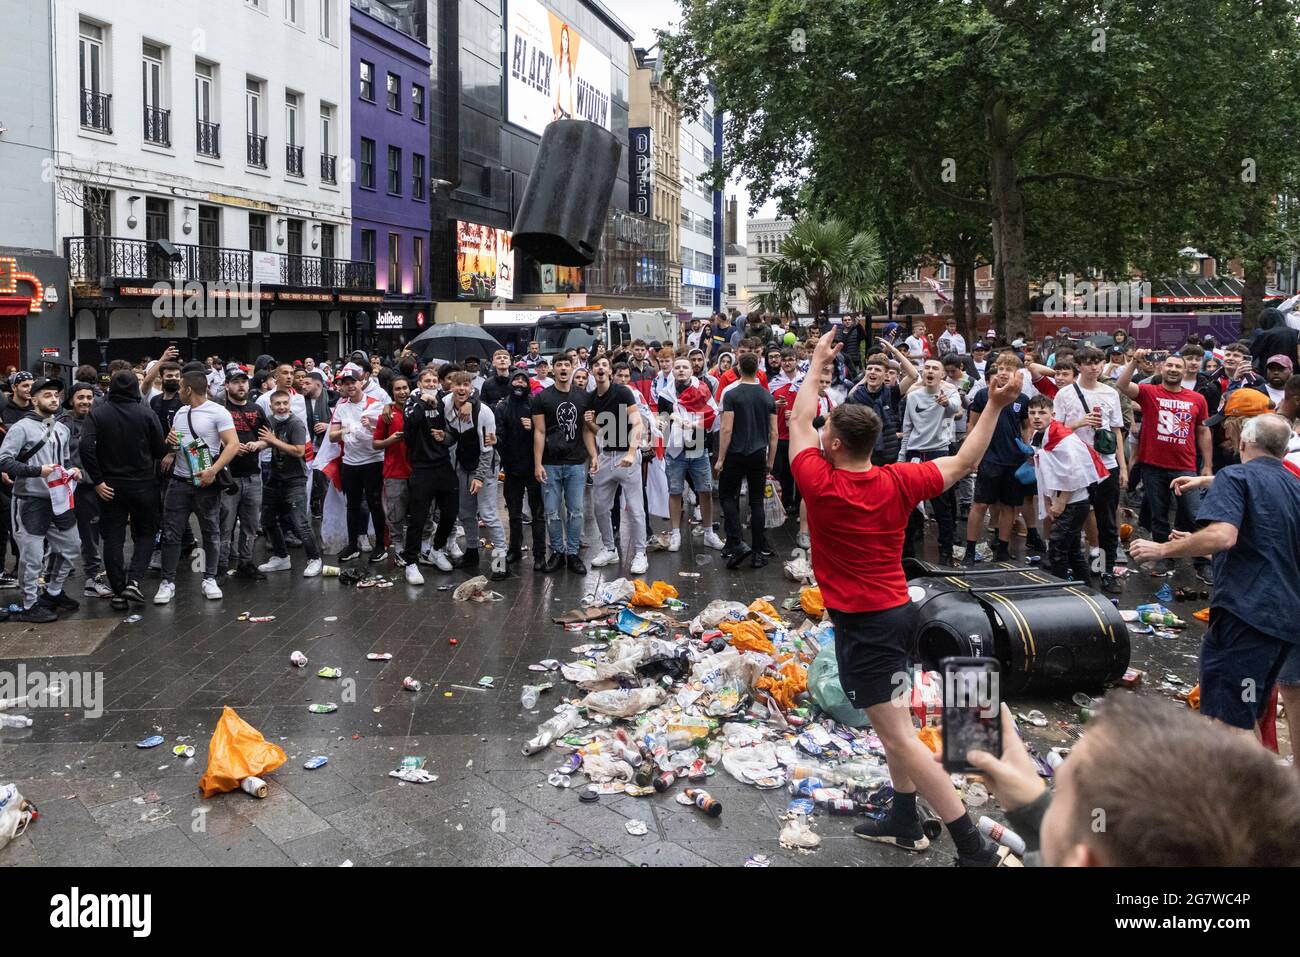 English football fans throwing rubbish bins before the England vs Italy Euro 2020 final, Leicester Square, London, 11 July 2021 Stock Photo